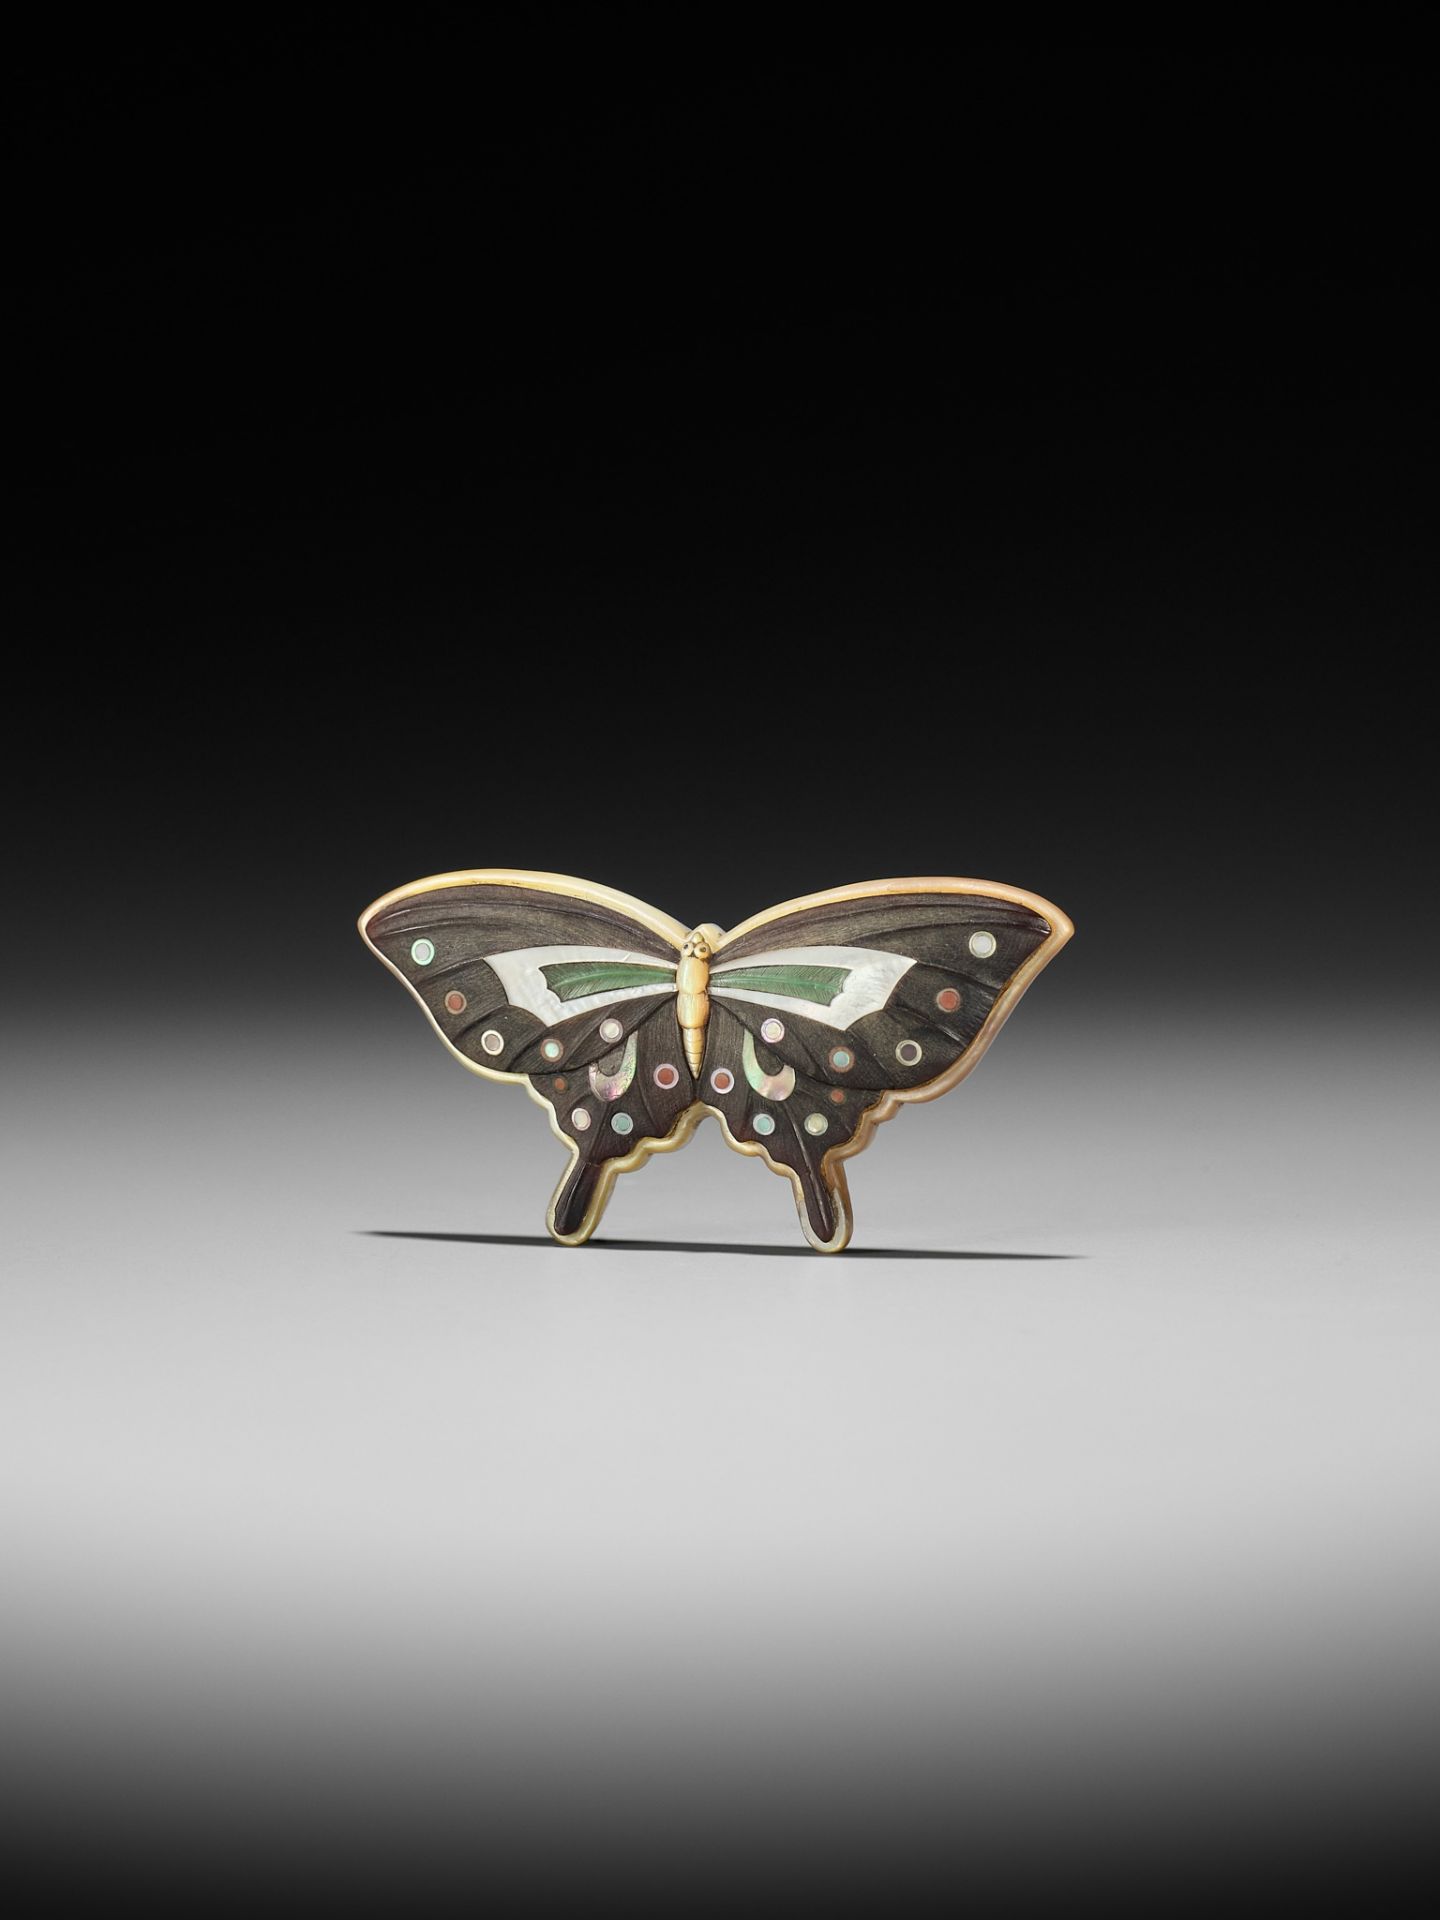 TOKOKU: A MASTERFUL MIXED MATERIAL NETSUKE OF A BUTTERFLY - Image 7 of 10